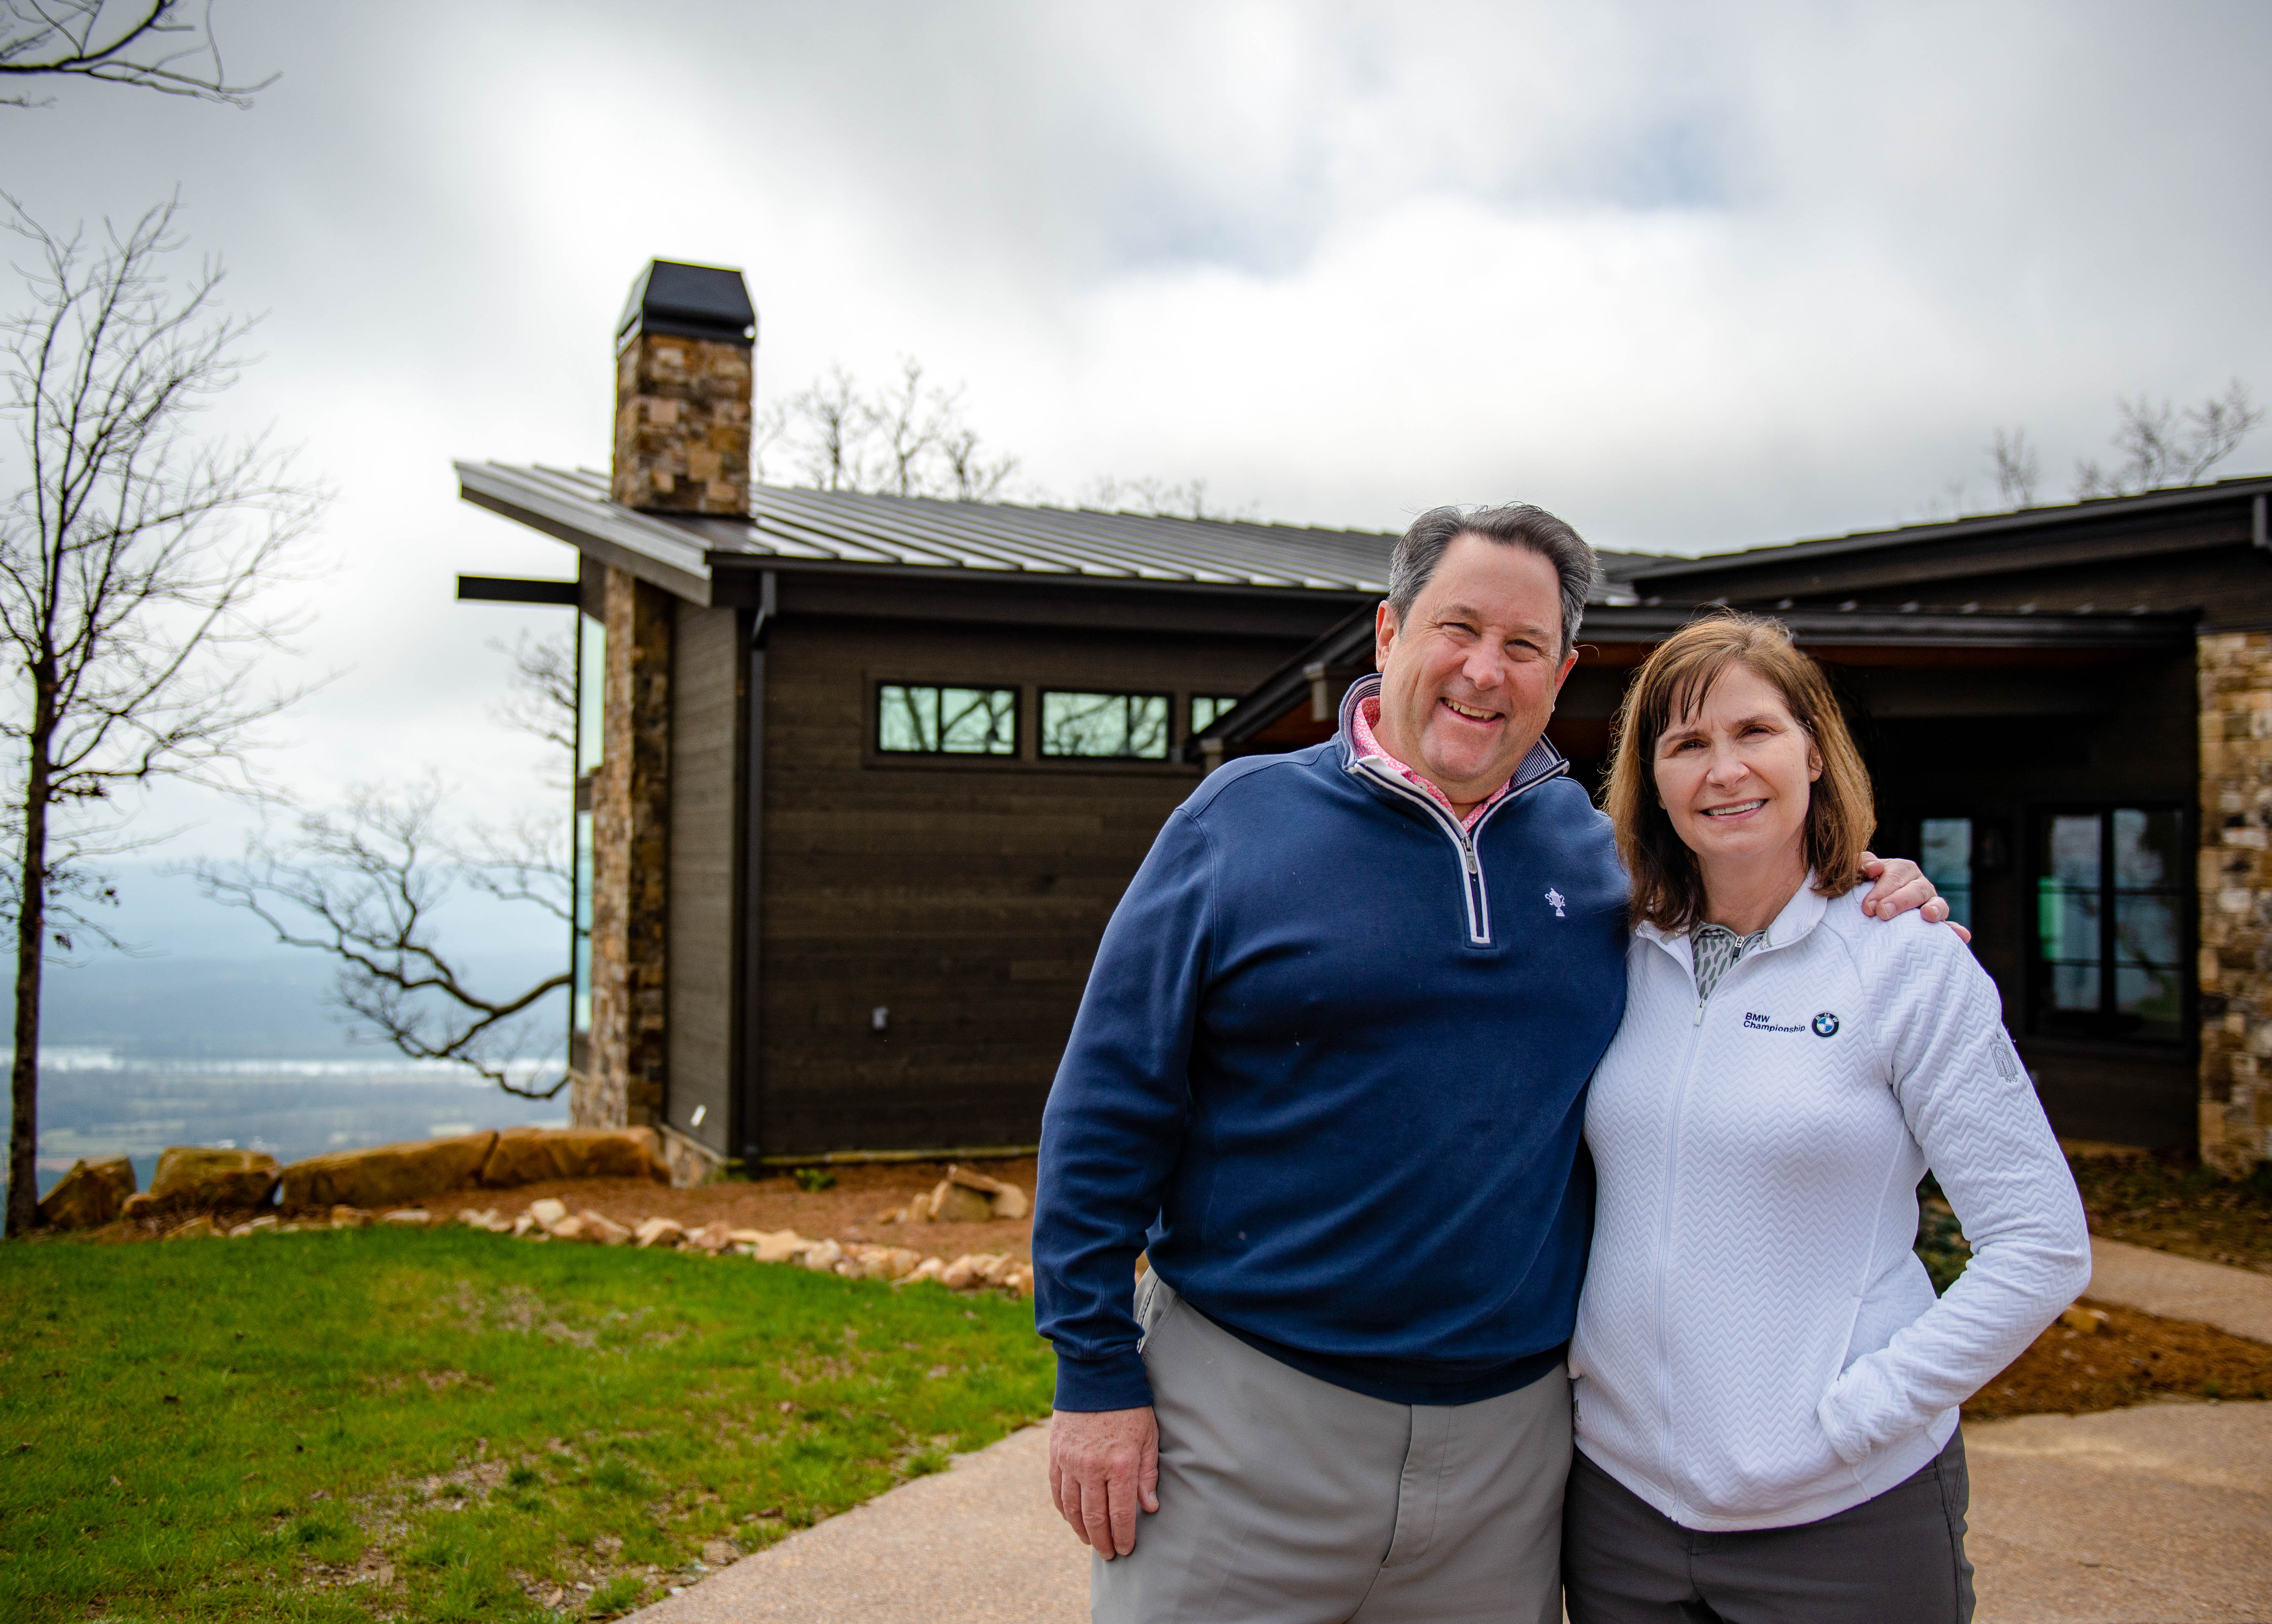 Smart Home owner's Mike and Margo Smith